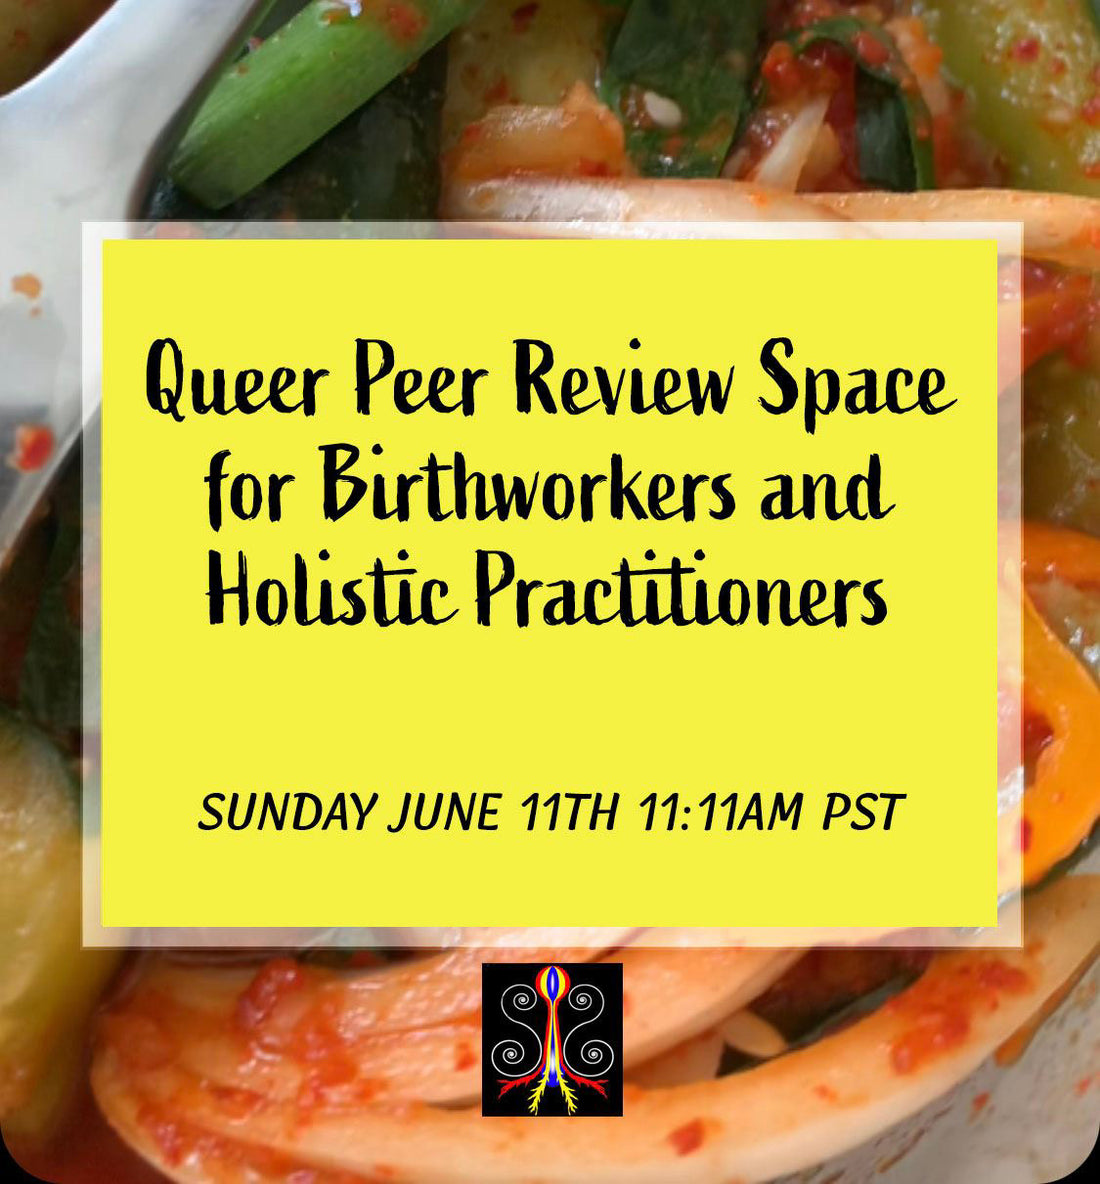 Queer Peer Review for Birthworkers and Holistic Practitioners